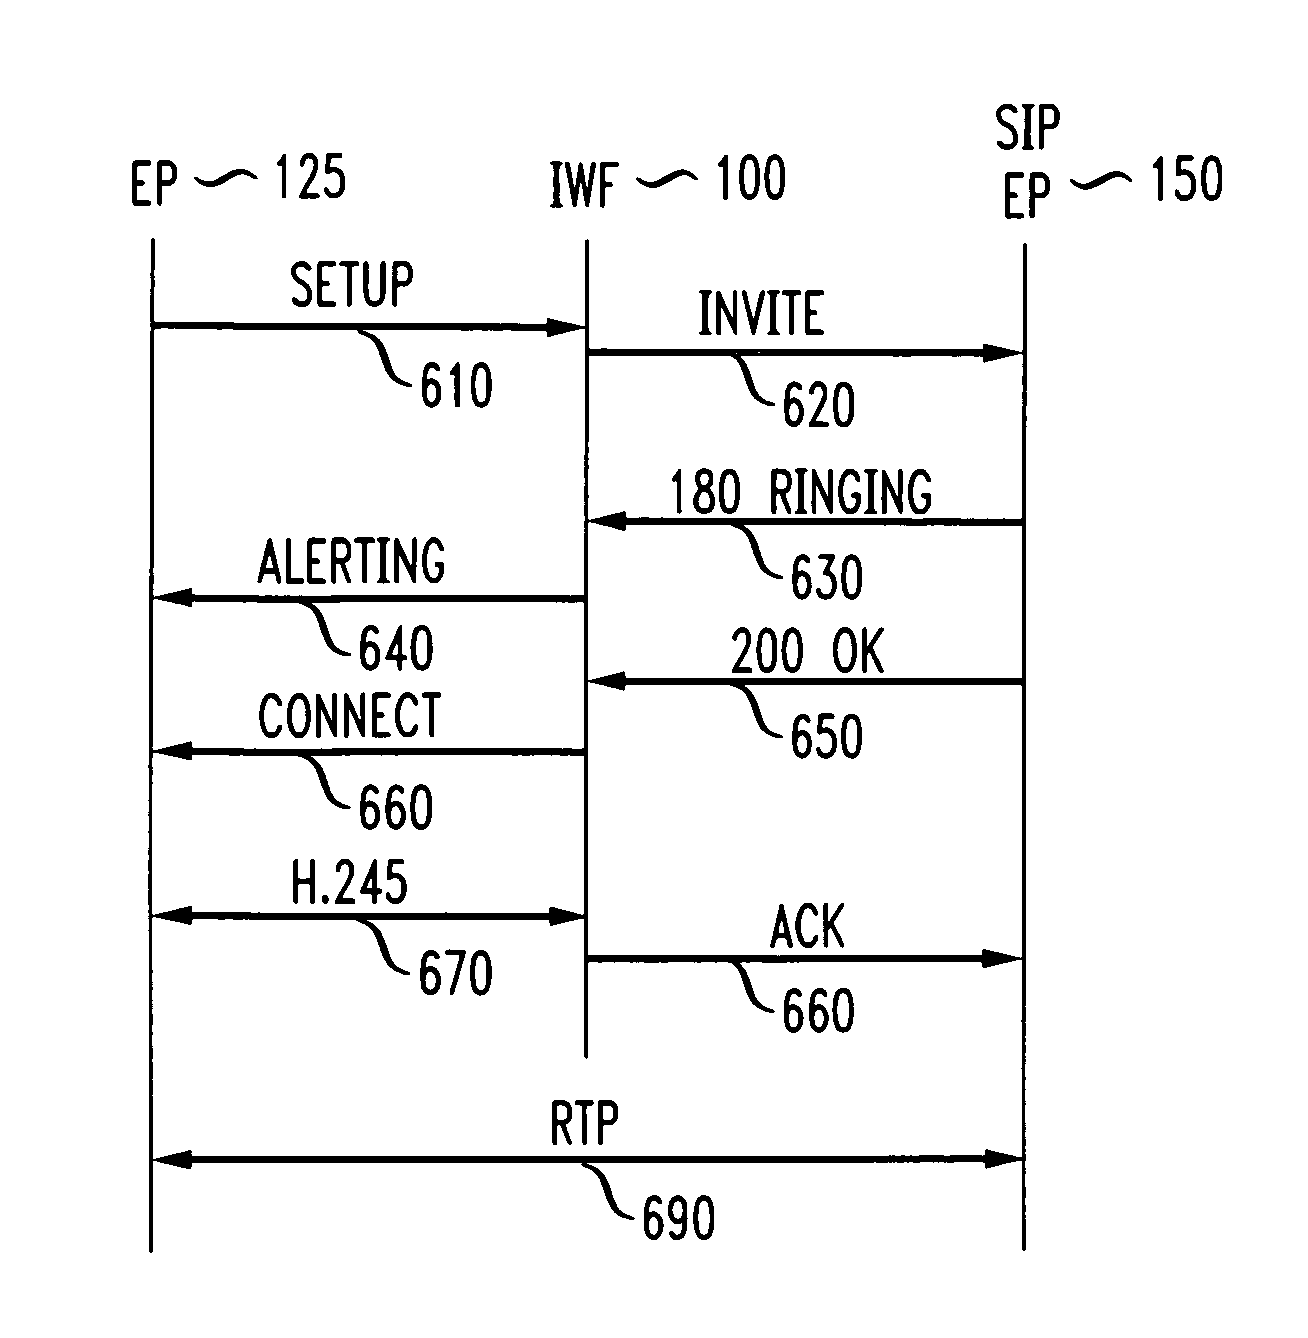 Method and apparatus for S.I.P./H. 323 interworking